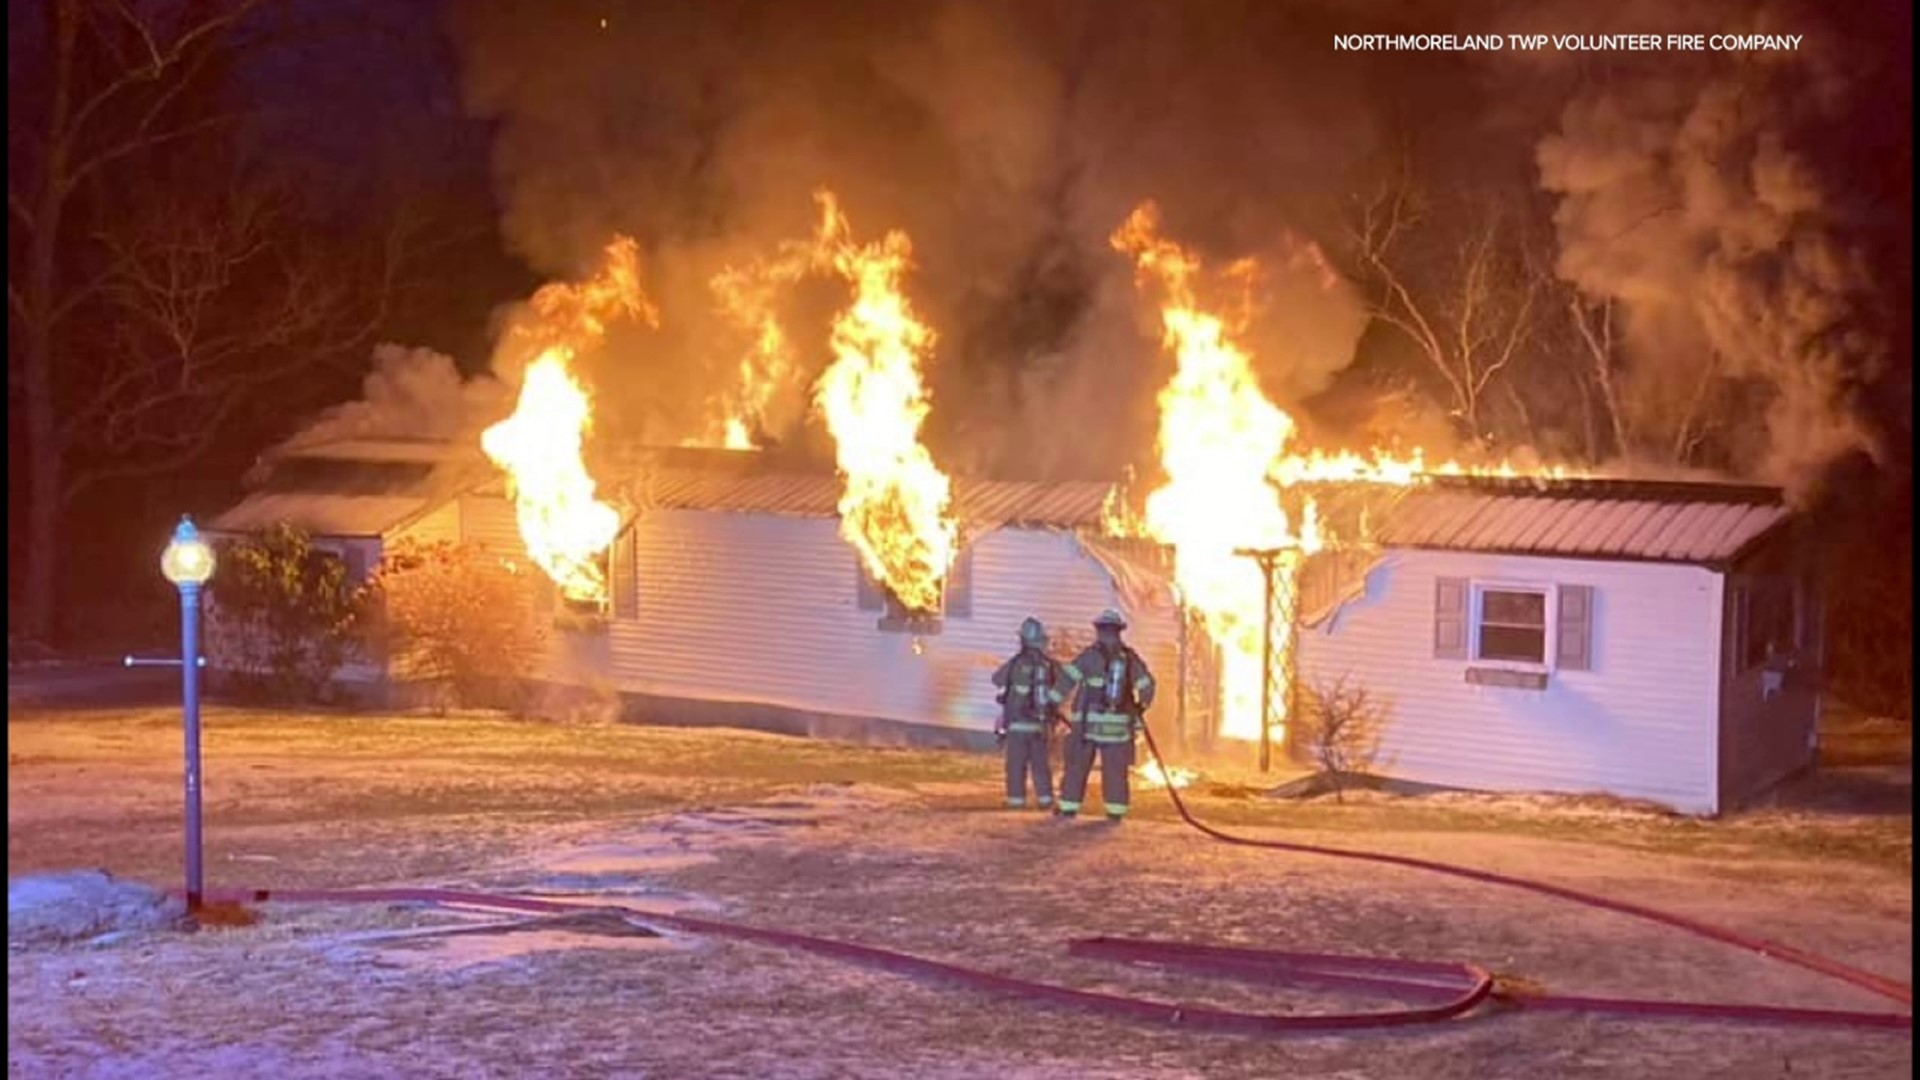 The fire started just before 6 a.m. Sunday in Northmoreland Township.